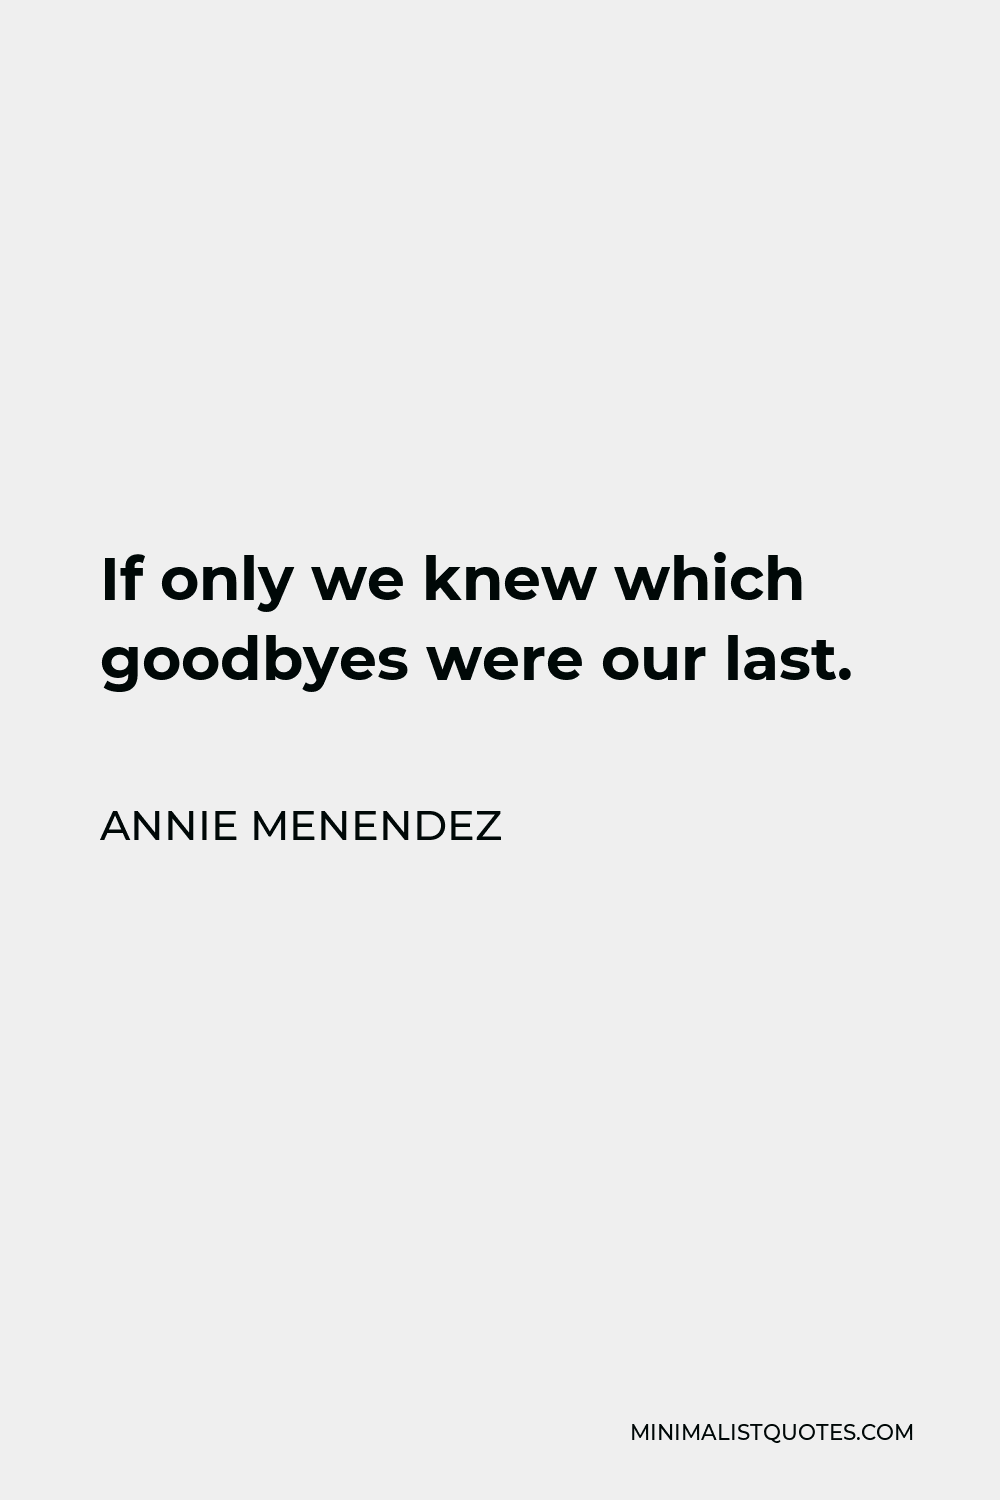 Annie Menendez Quote - If only we knew which goodbyes were our last.